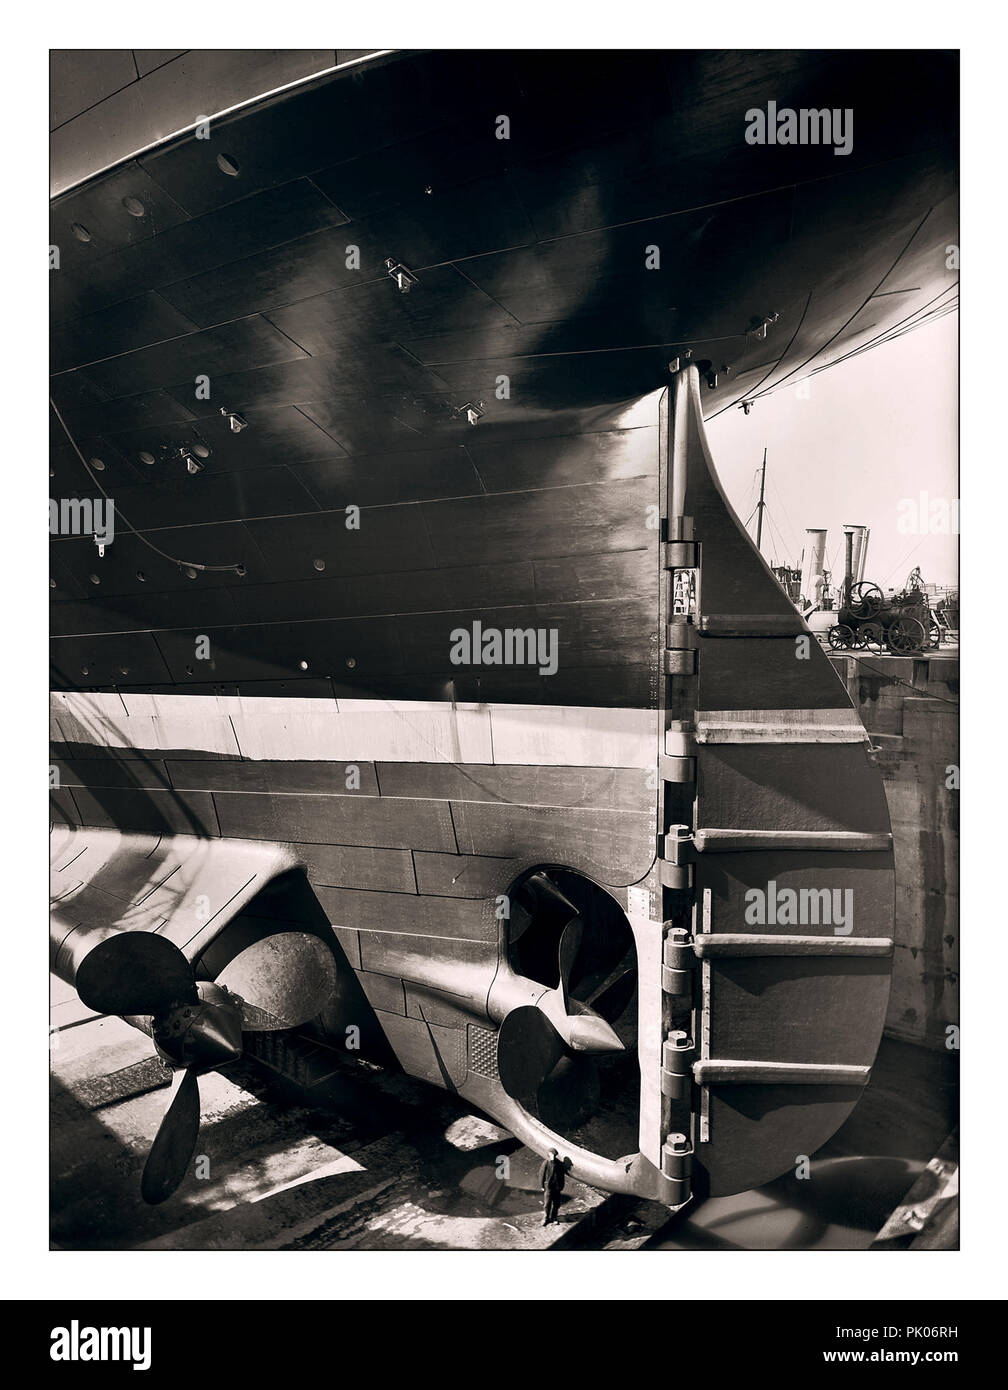 TITANIC STERN WORKER SIZE CONSTRUCTION Historic 1912 image of RMS Titanic rudder and propellors with ship worker in the huge dry dock construction site adding scale to the huge Ocean Liner Harland and Wolff shipyard Belfast UK Stock Photo